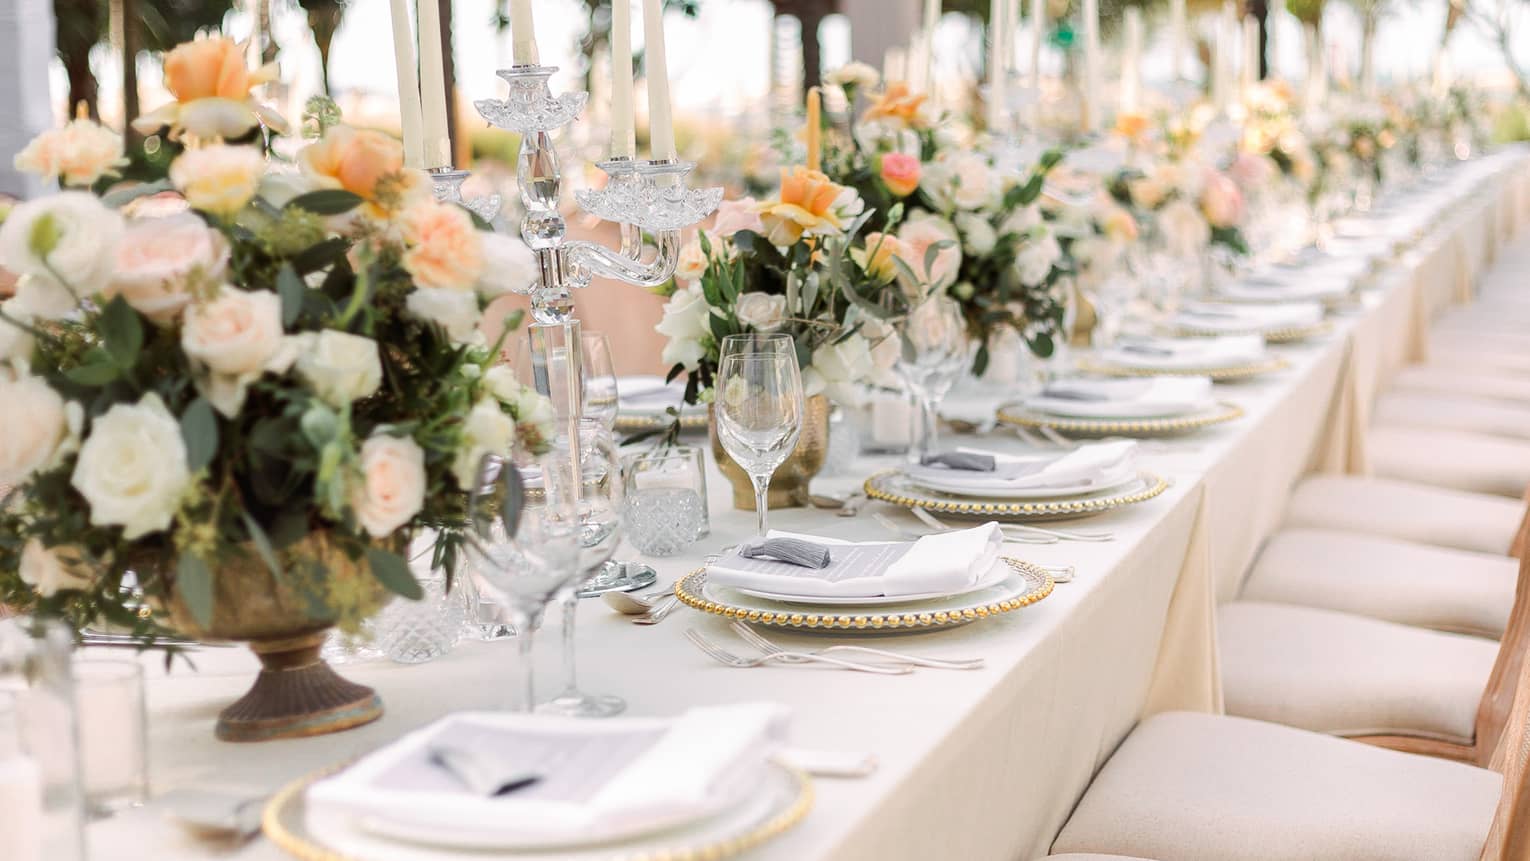 A long table with orange and cream flower centerpieces and set for a wedding.